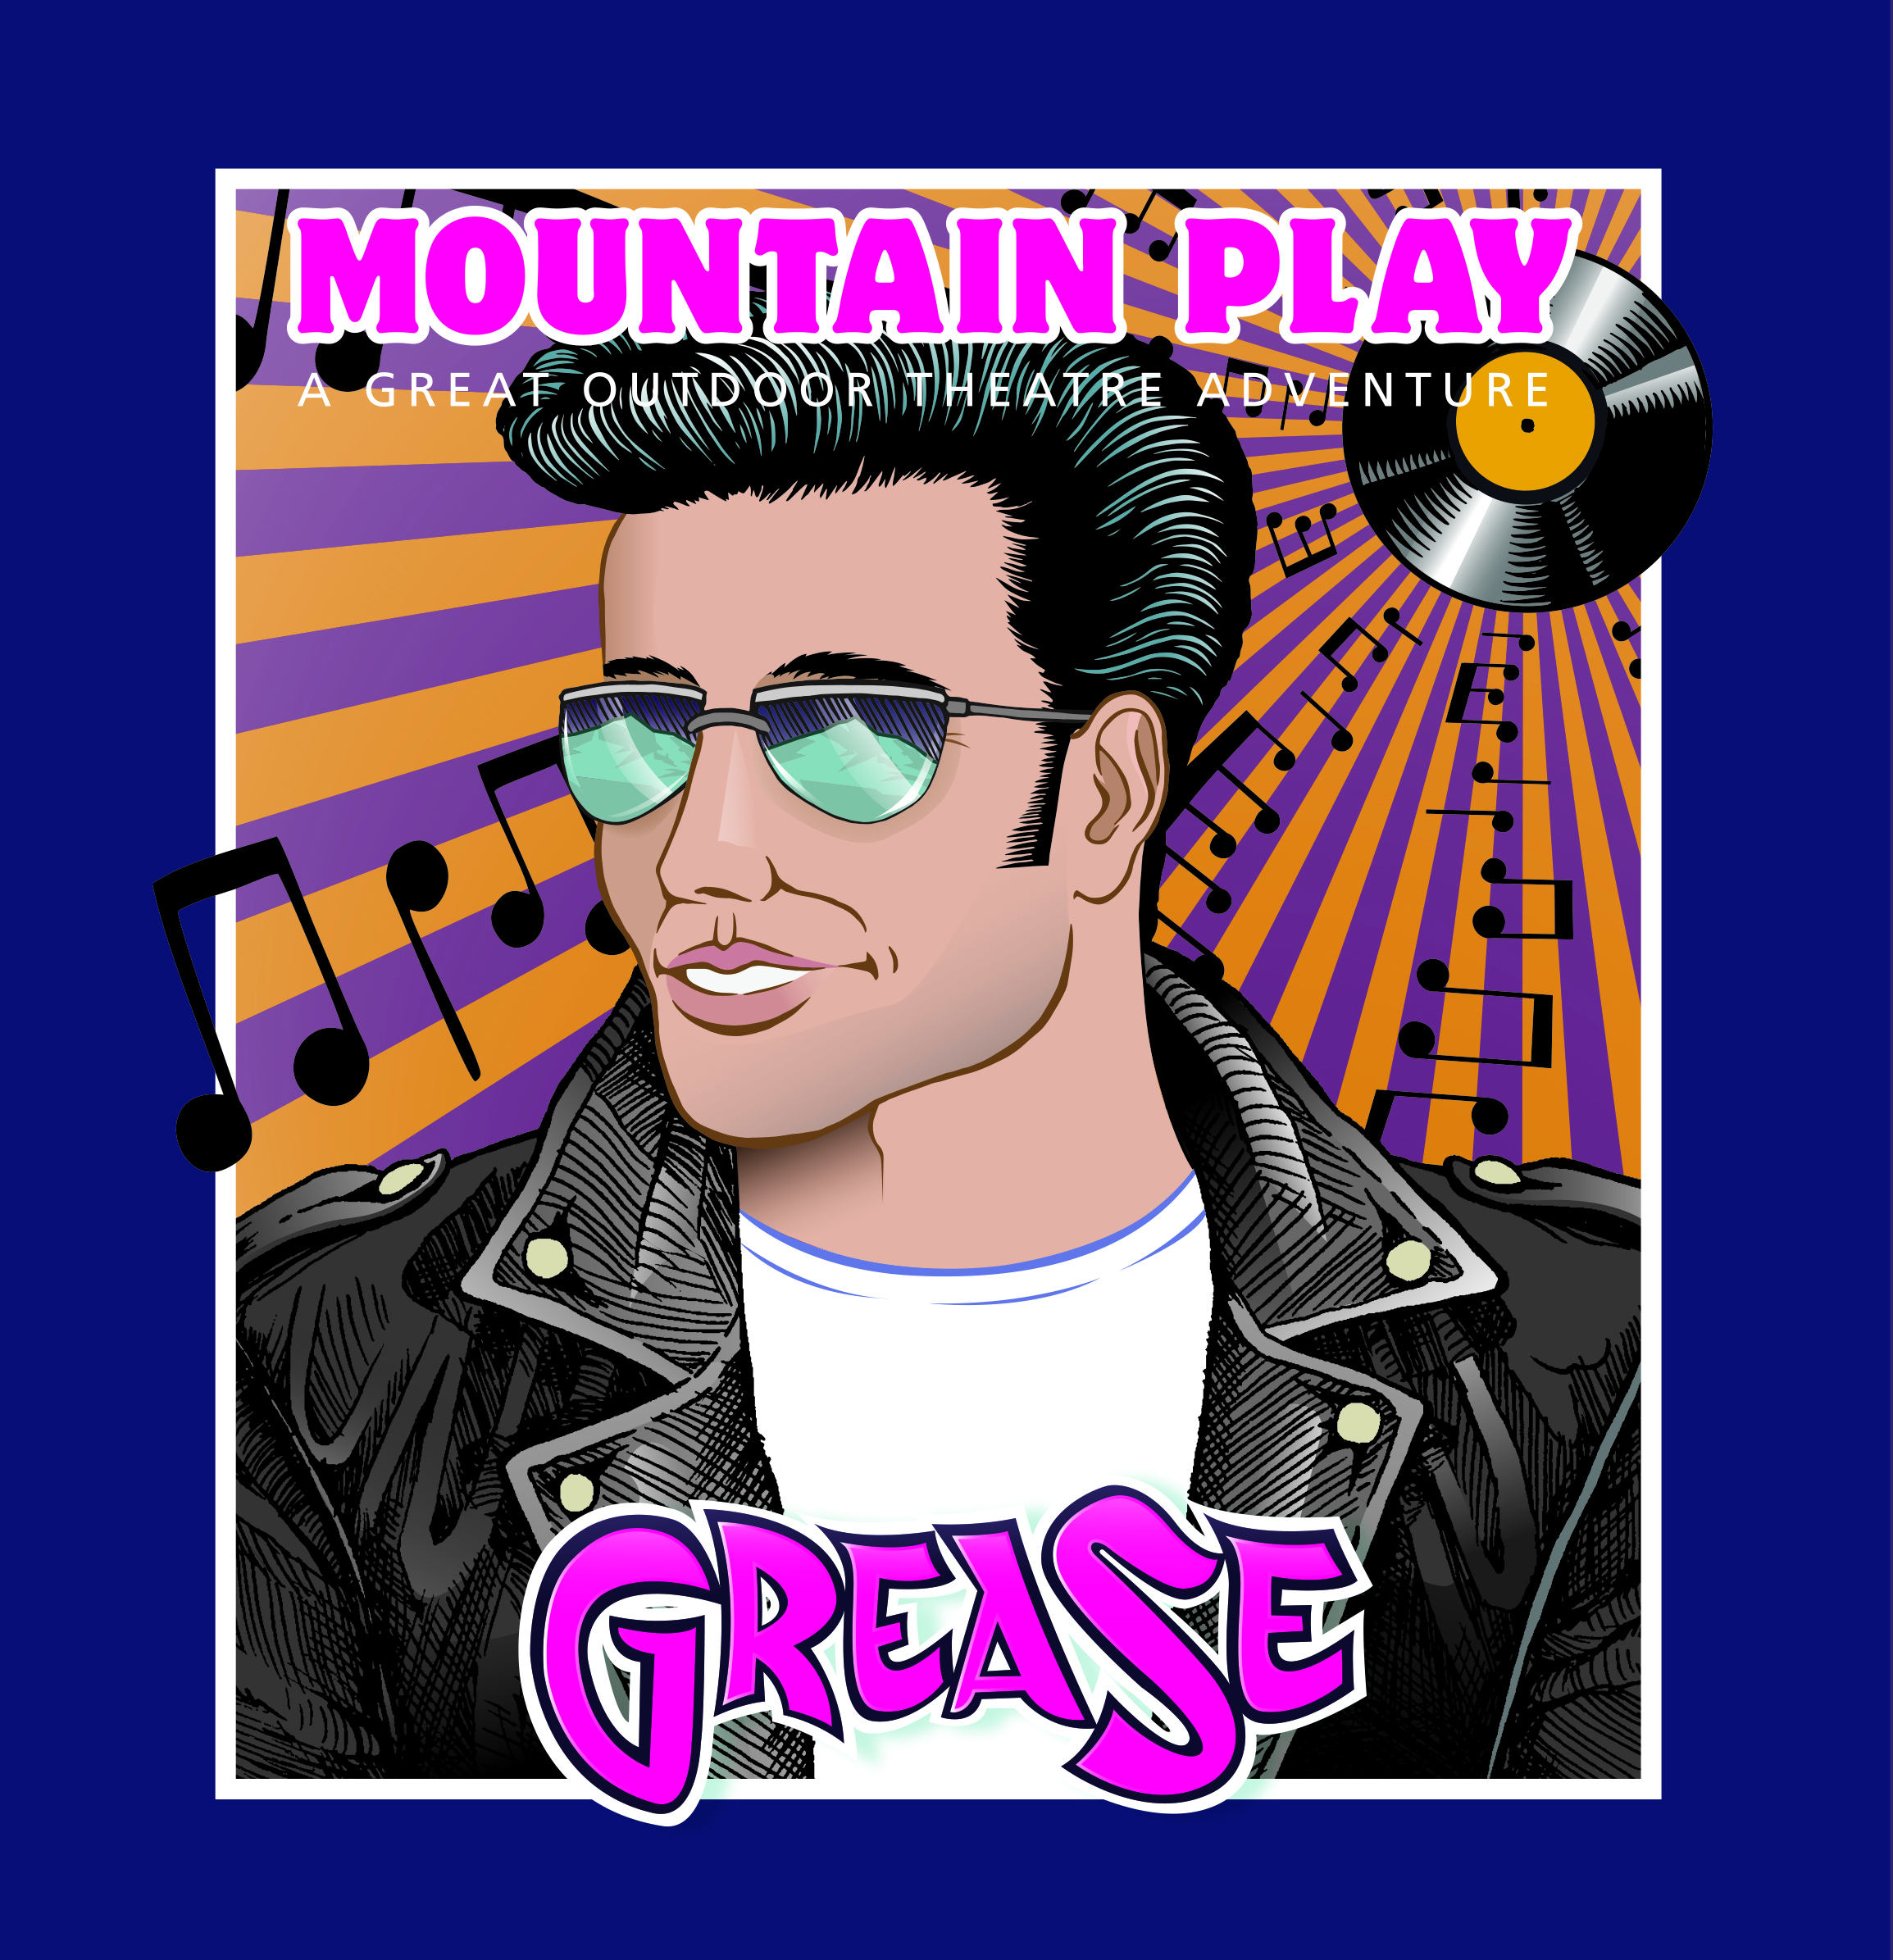 2019 GREASE poster art